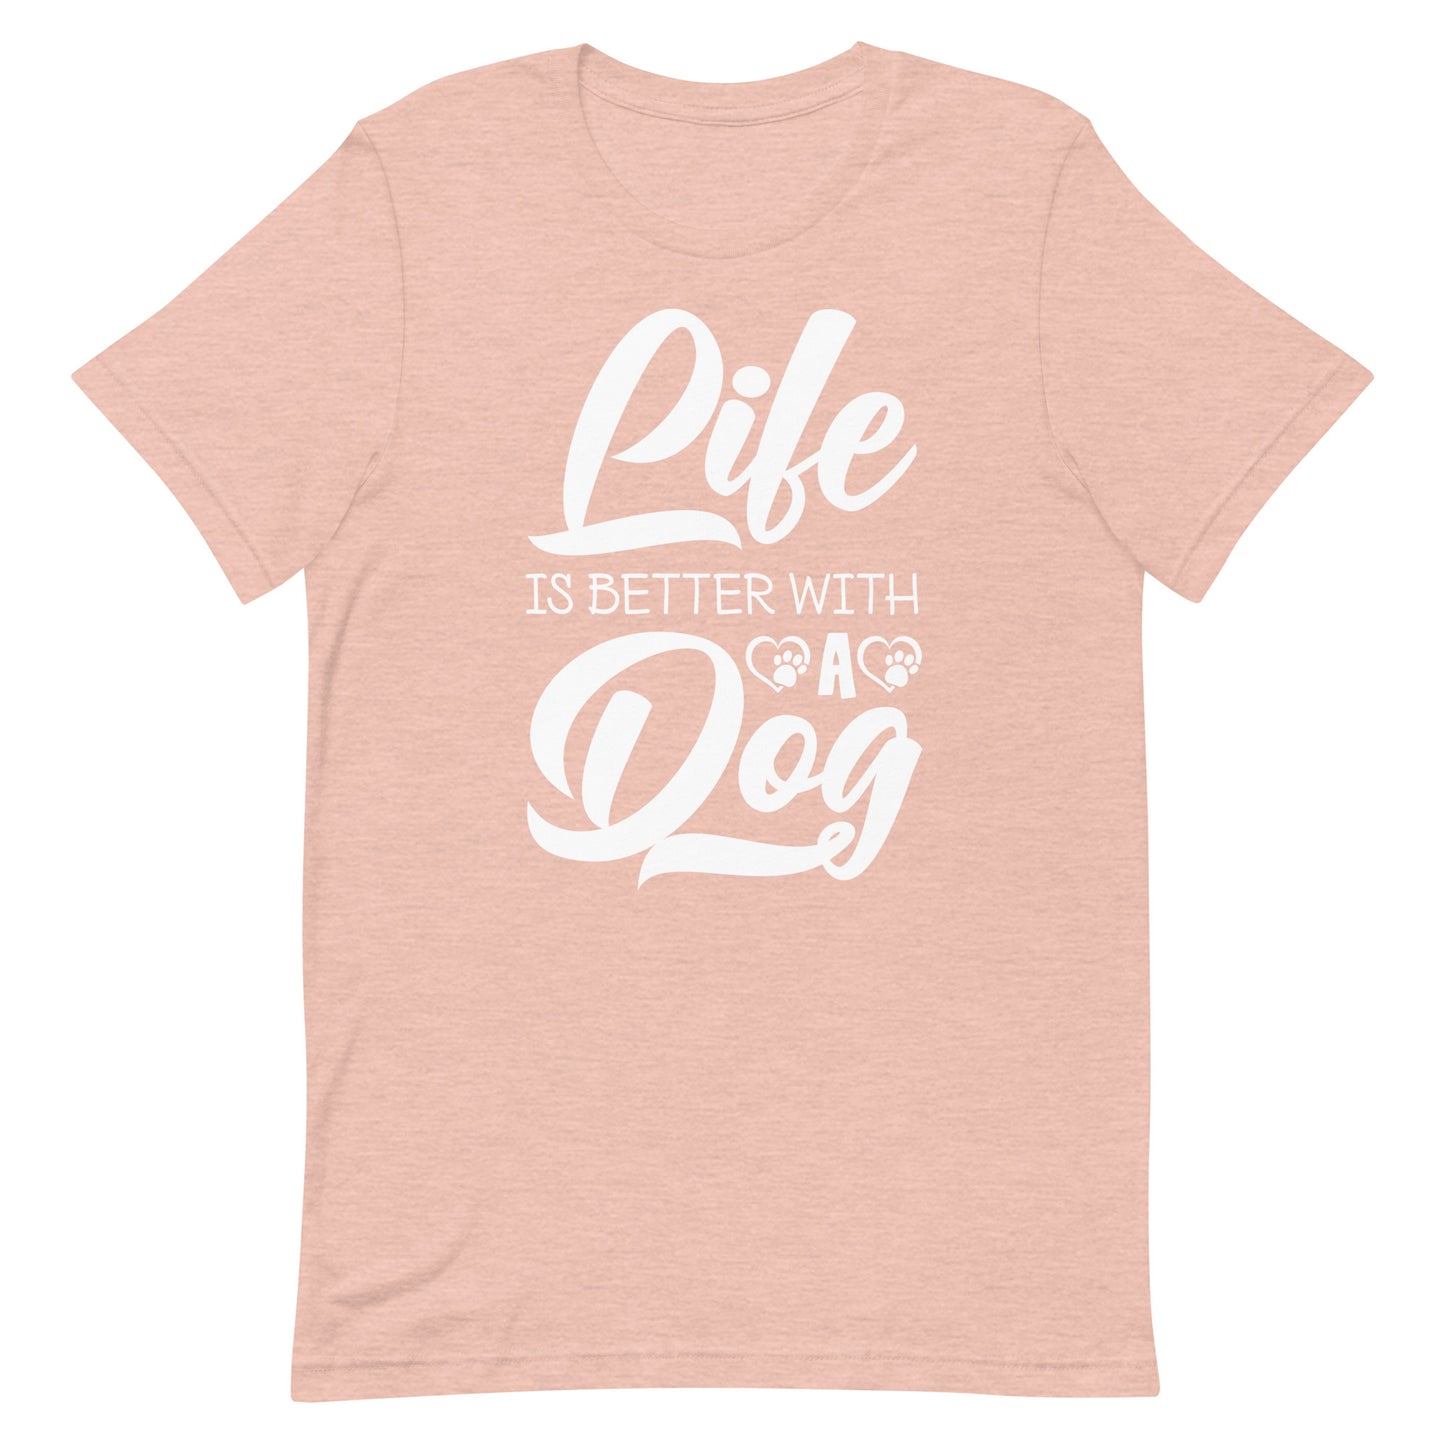 Life is Better with a Dog T-Shirt